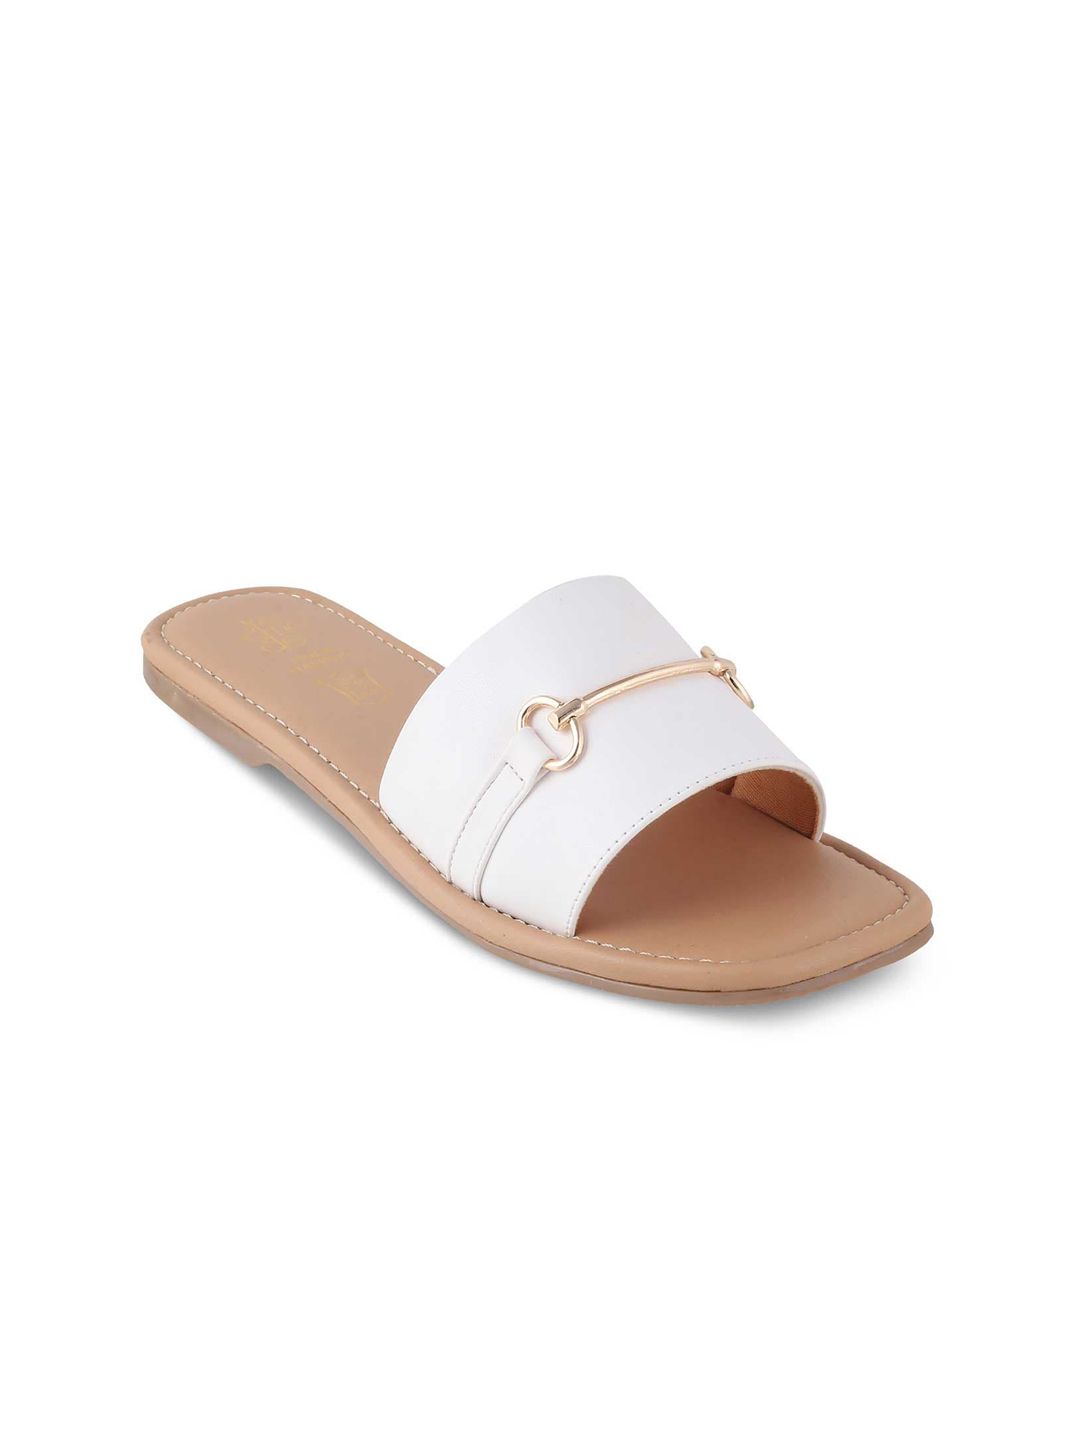 Tresmode Buckle Detail Open Toe Flats Price in India